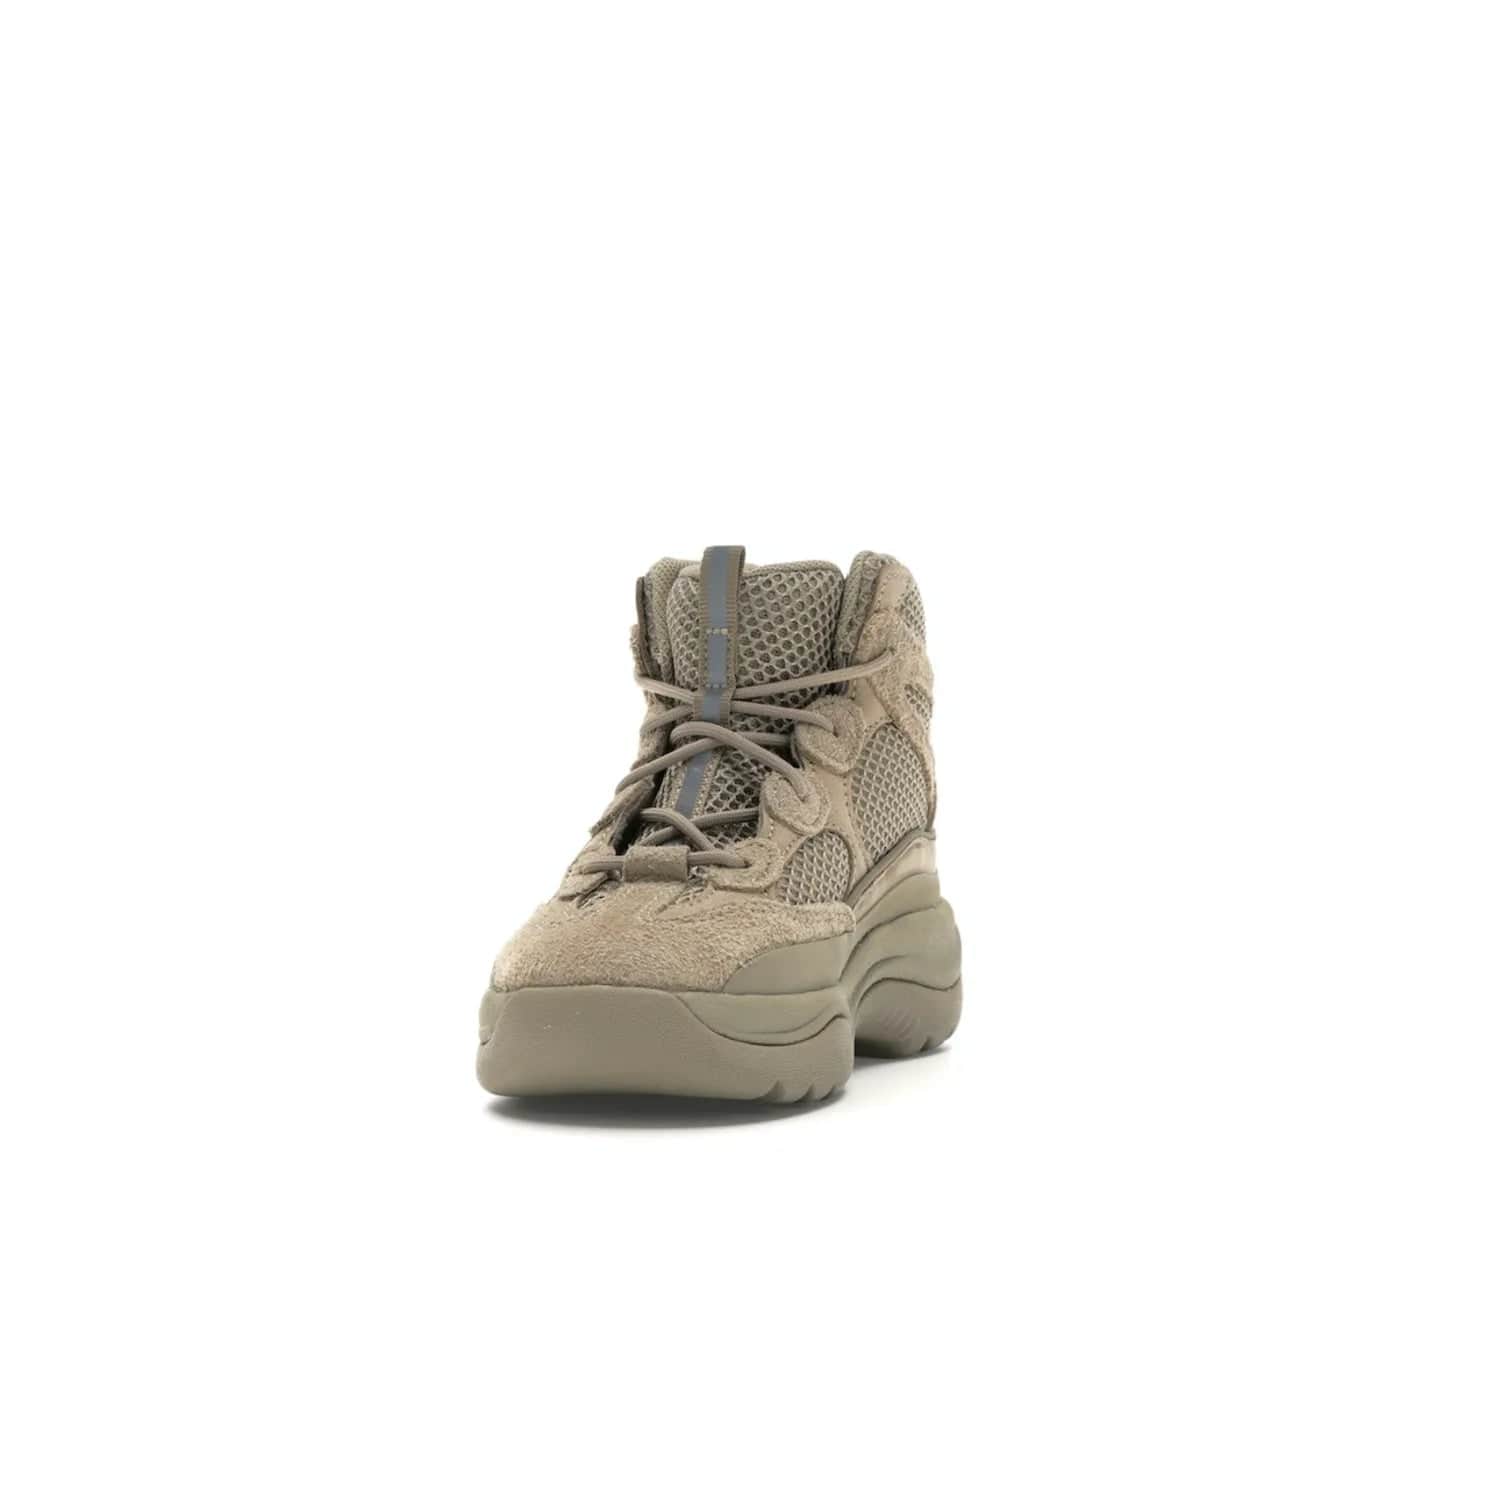 adidas Yeezy Desert Boot Rock (Kids) - Image 12 - Only at www.BallersClubKickz.com - Elevate your style this season with the adidas Yeezy Desert Boot Rock. Crafted from layered nylon and suede, this chic kids' silhouette features an EVA midsole and rubber outsole for superior cushioning and traction.